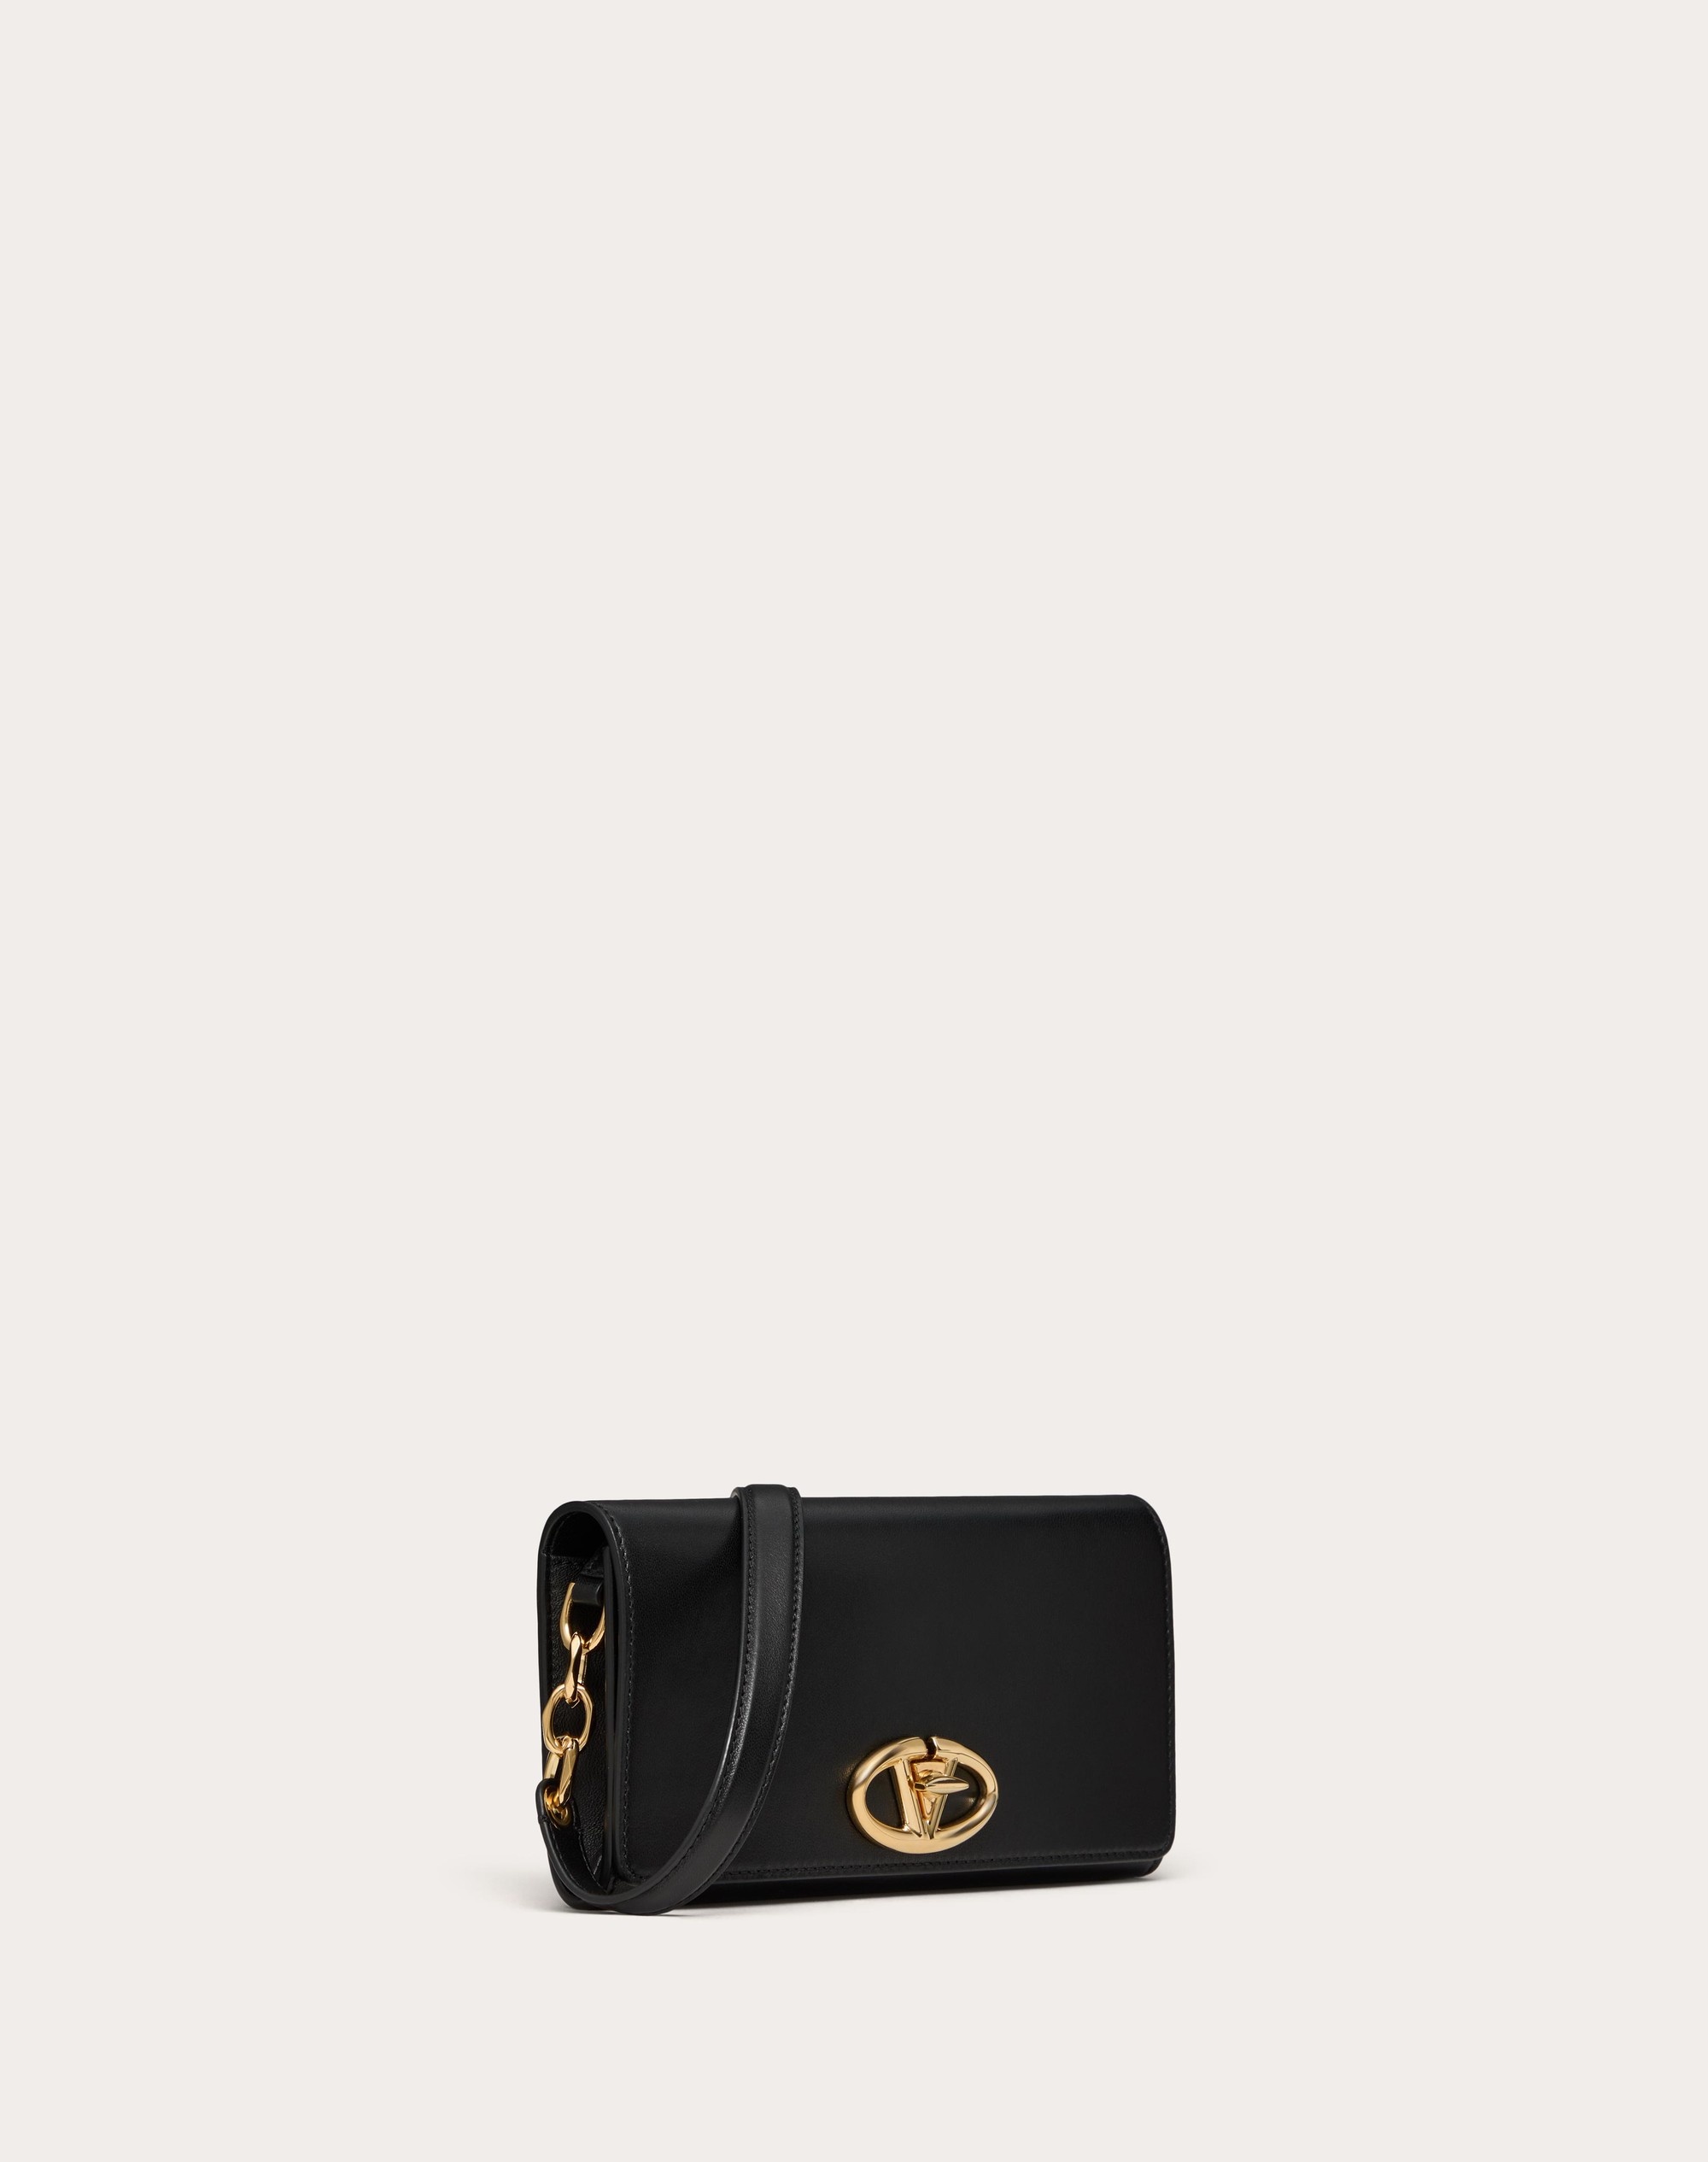 VLOGO THE BOLD EDITION WALLET WITH SHOULDER STRAP IN NAPPA - 2